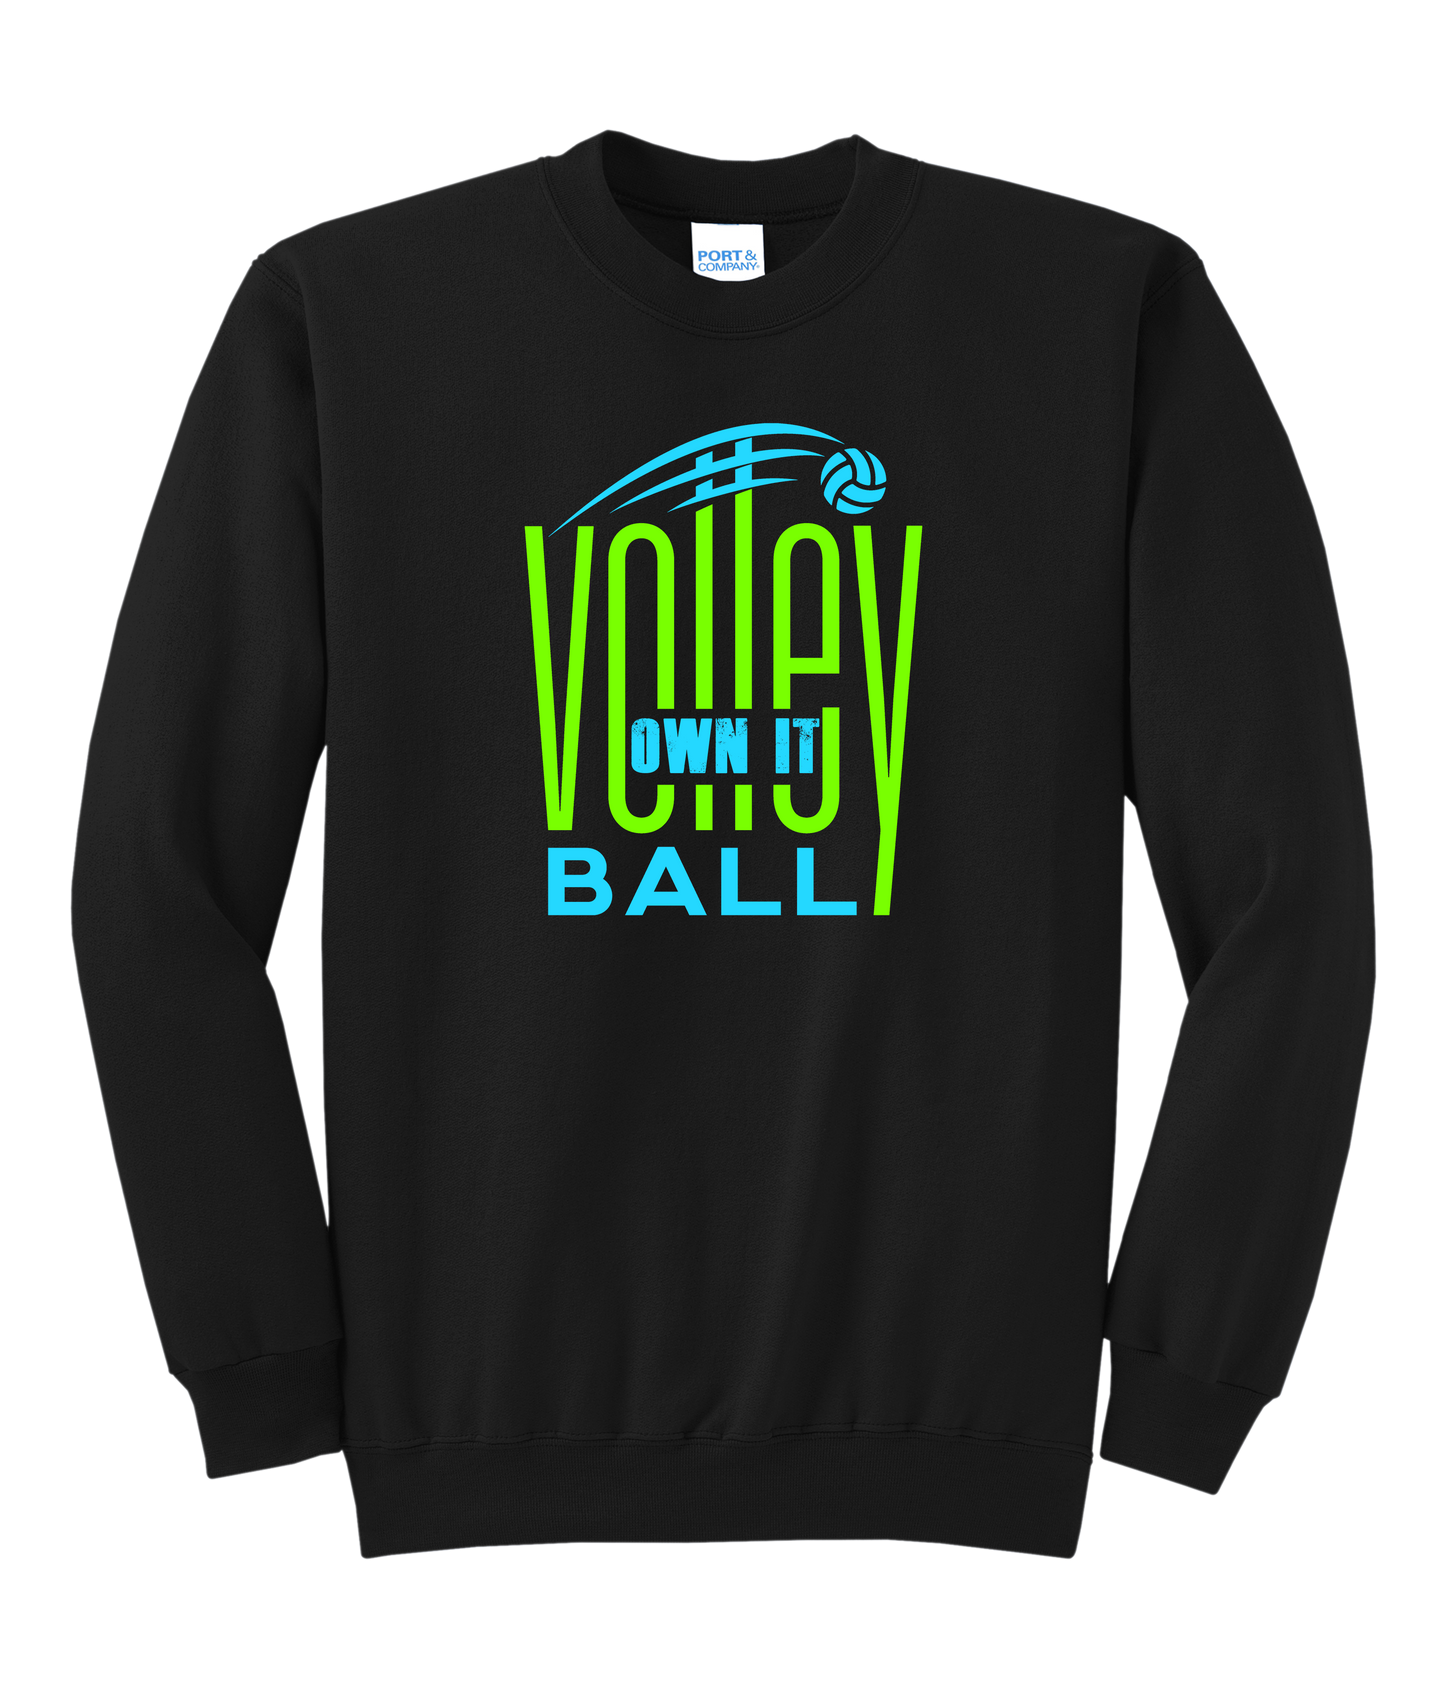 Own It Volleyball Club Crewneck Sweatshirt (Adult) Multiple Colors Available